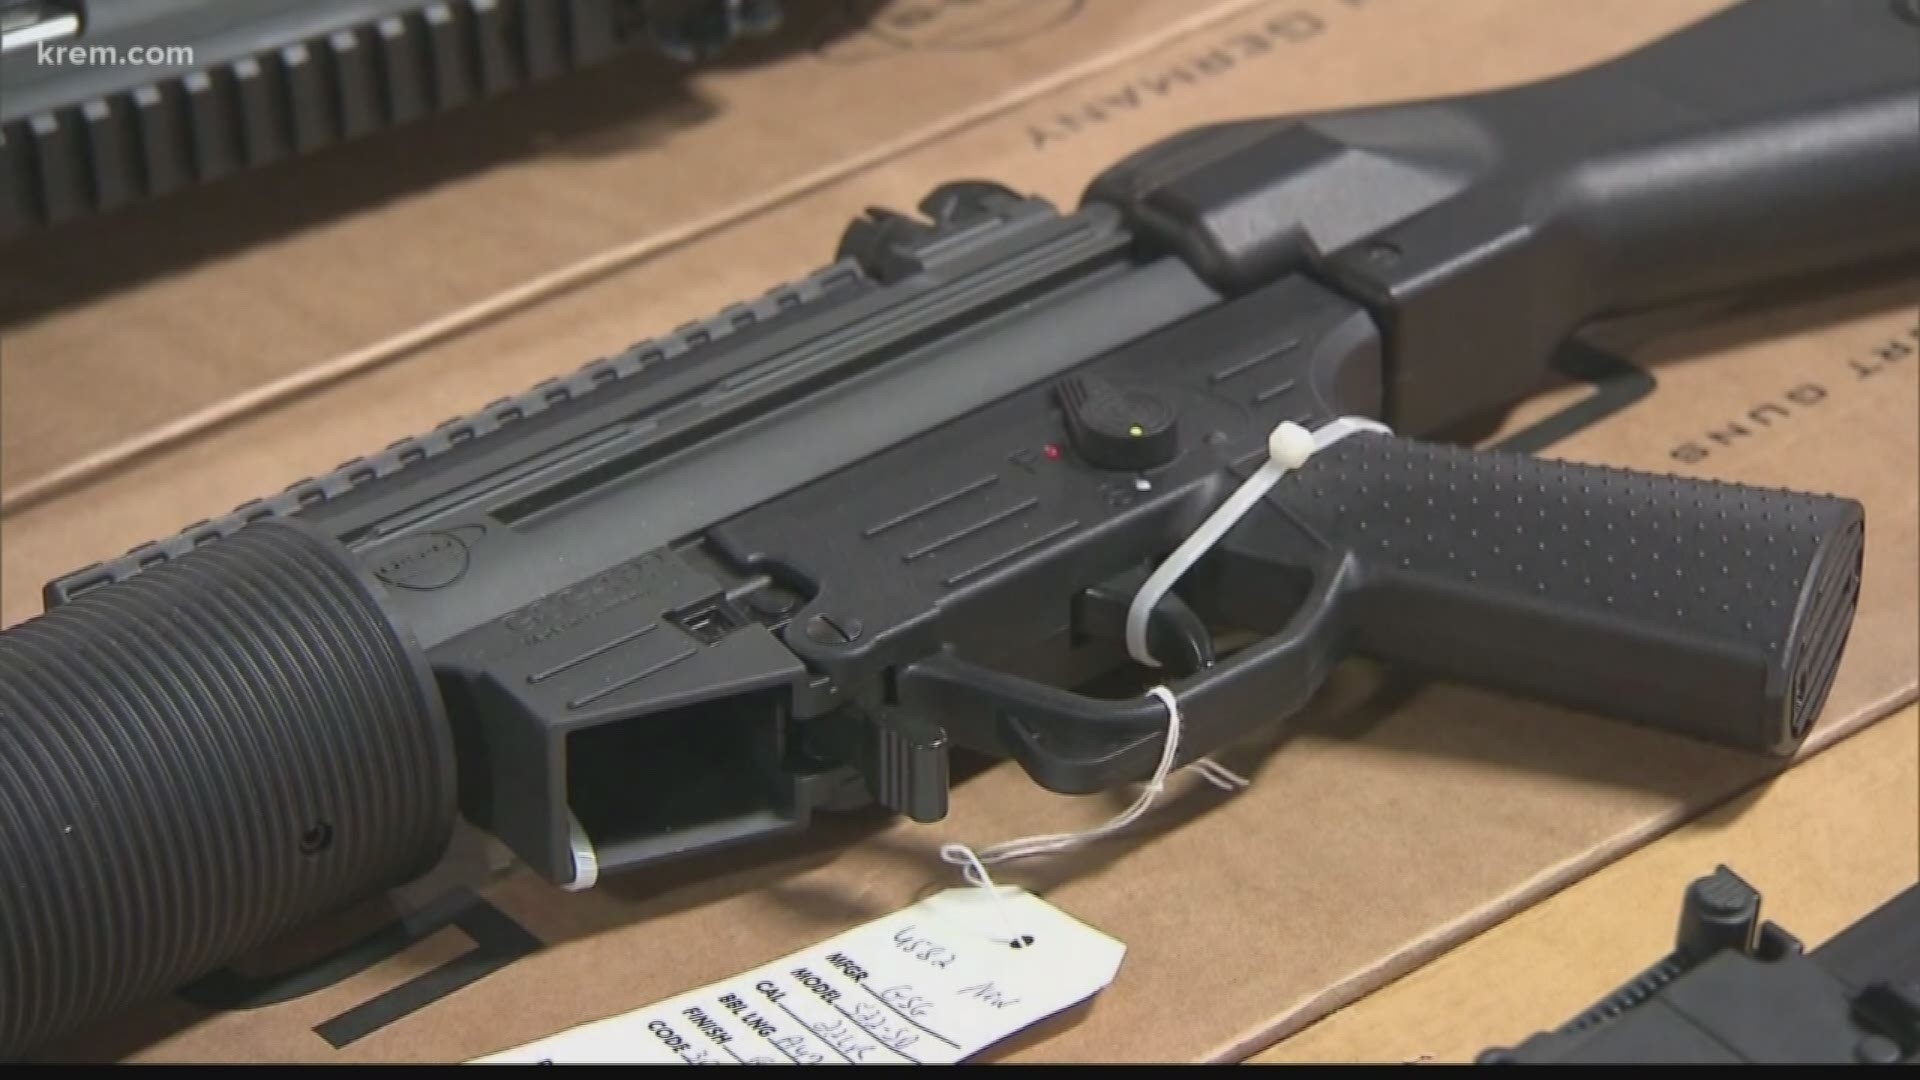 The state of Washington is looking for a way to make gun background checks more efficient. The Office of Financial Management recommends a centralized system.